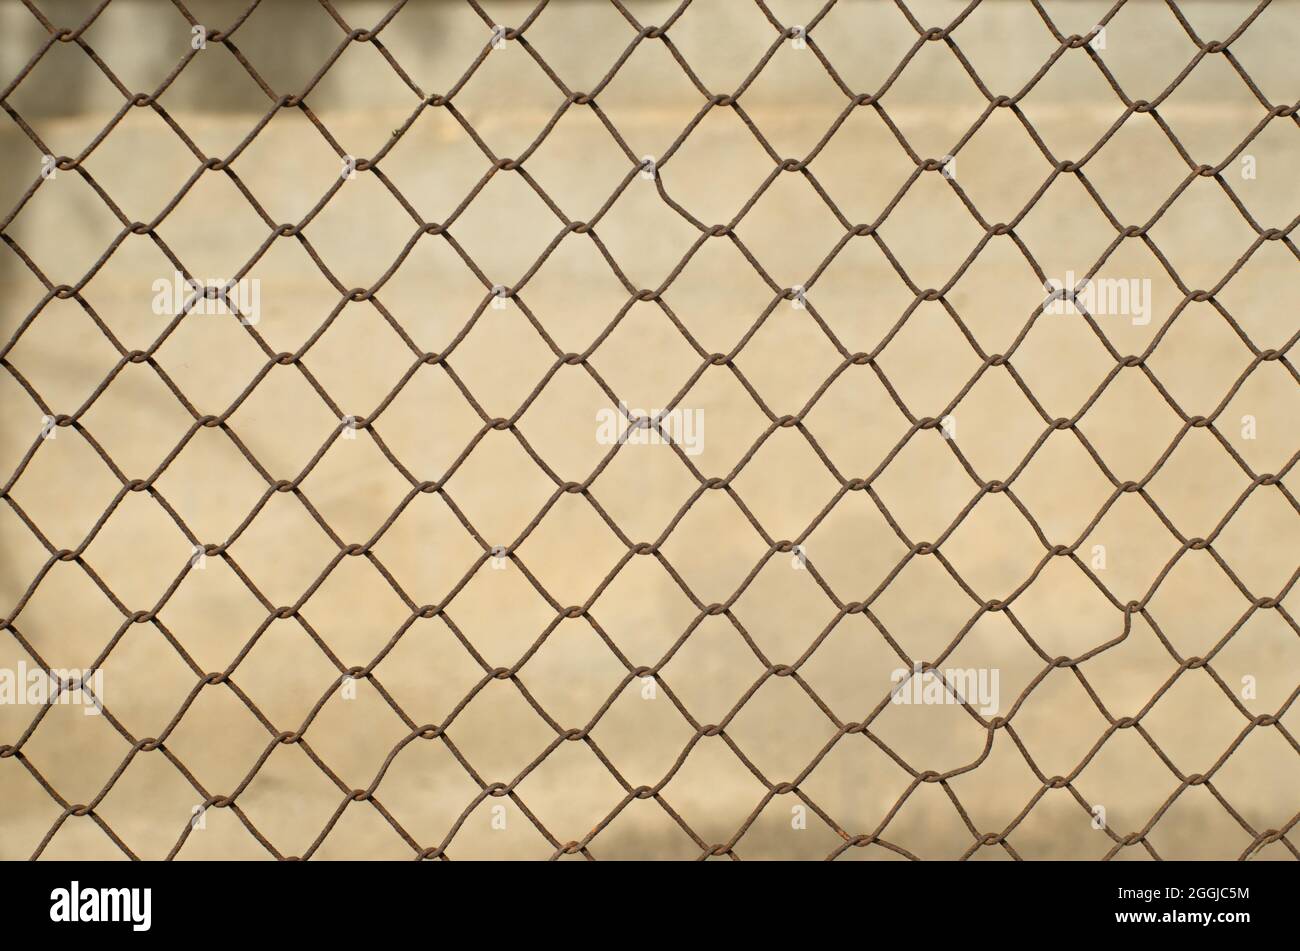 imperfect rusty wire mesh fence. concept of prohibited freedom. wallpaper idea Stock Photo